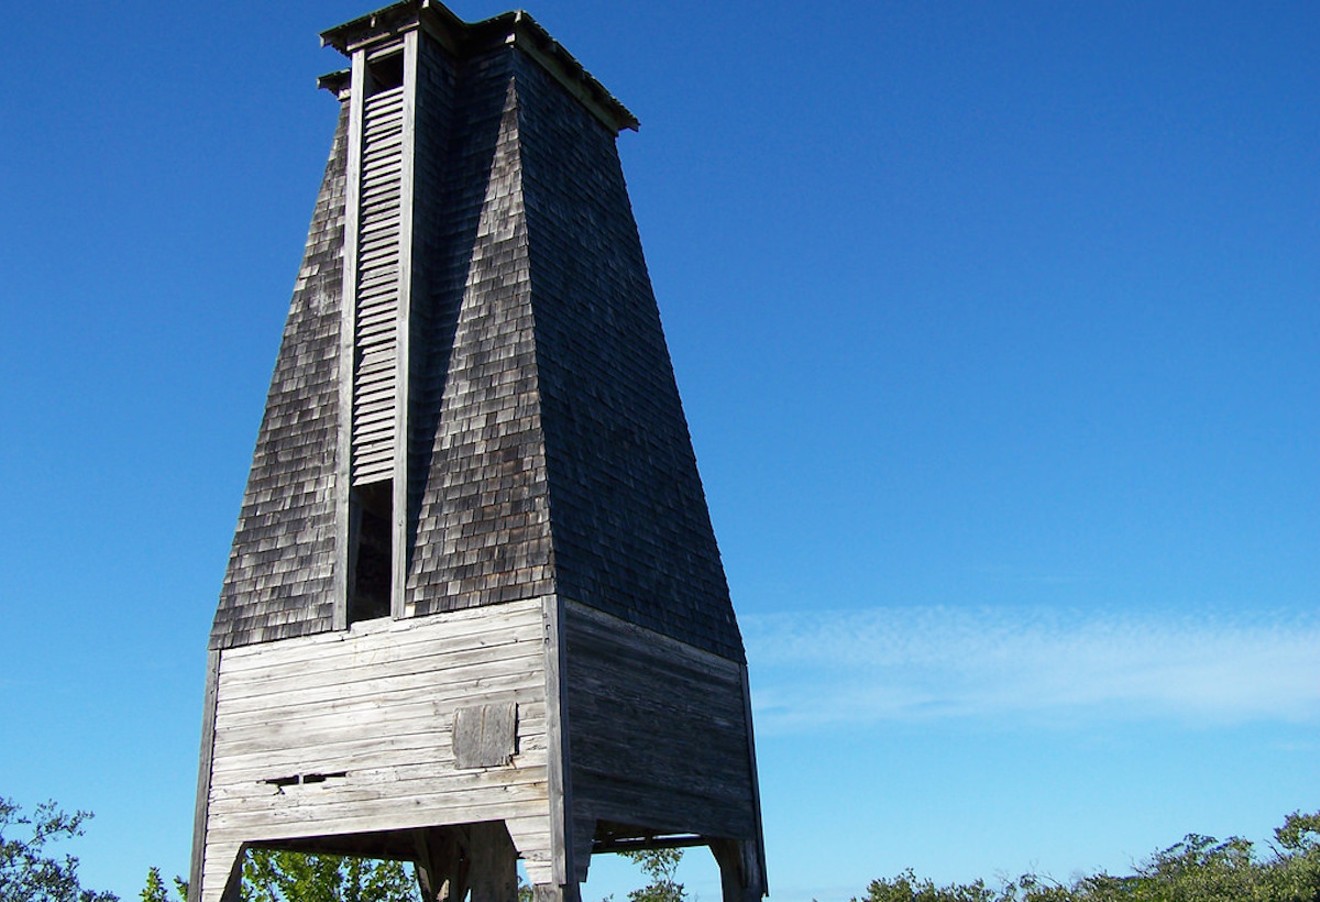 Sugarloaf Key's bat tower has stood since 1929, but Hurricane Irma downed it.